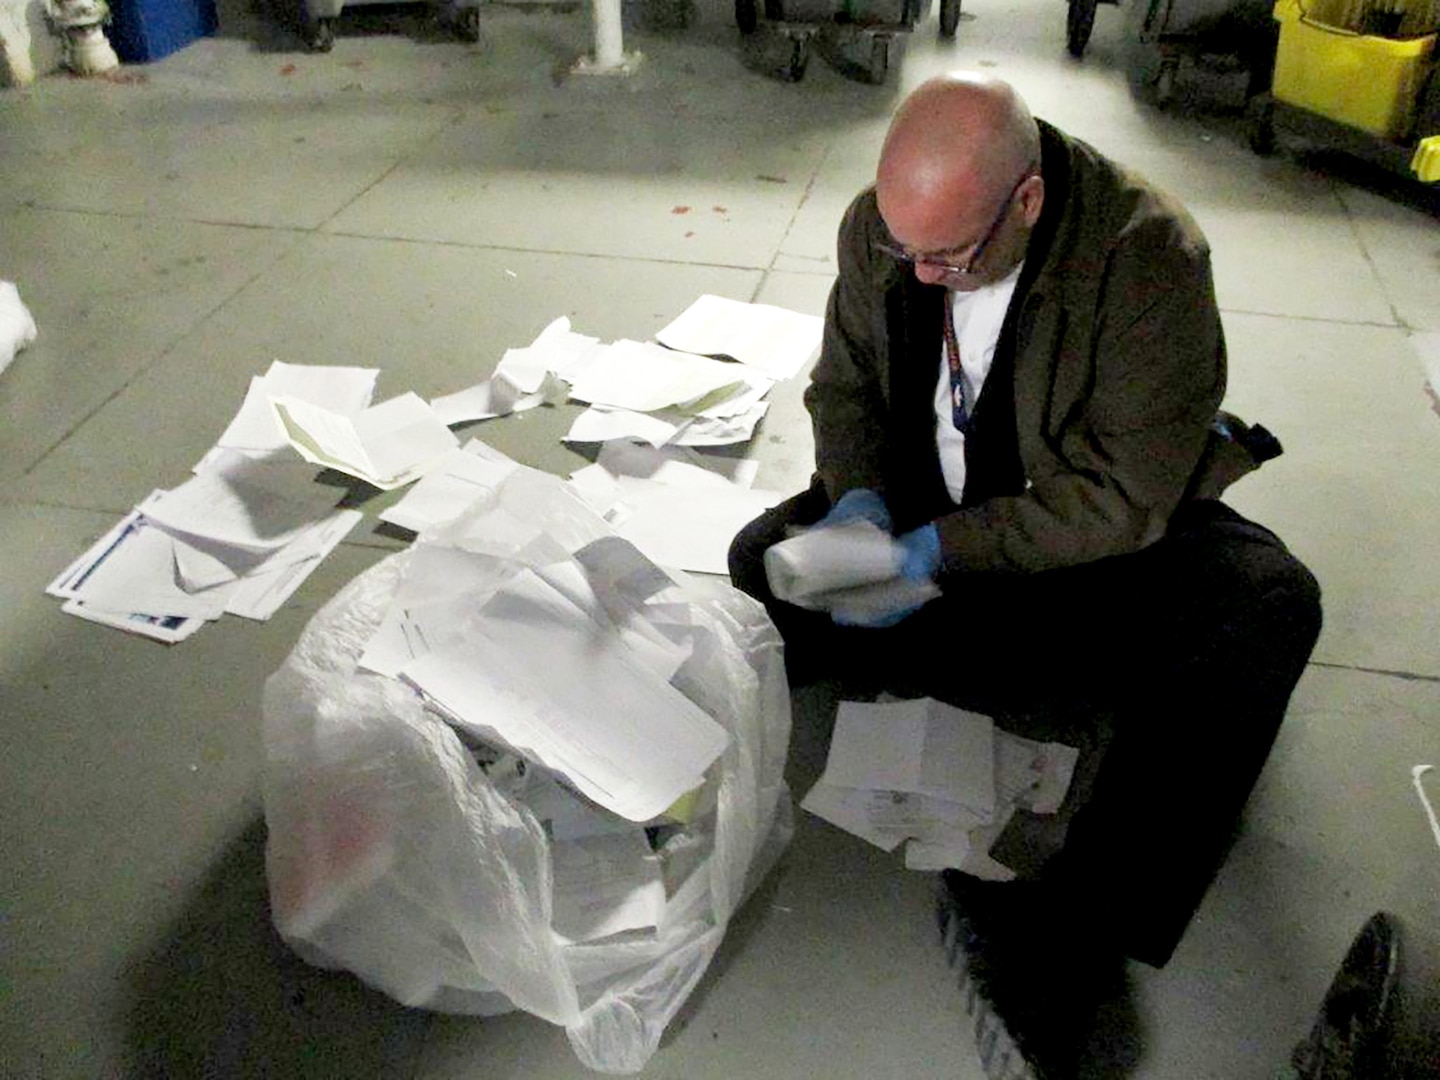 A Joint OPSEC Support Element agent weeds through documents that have been thrown away.